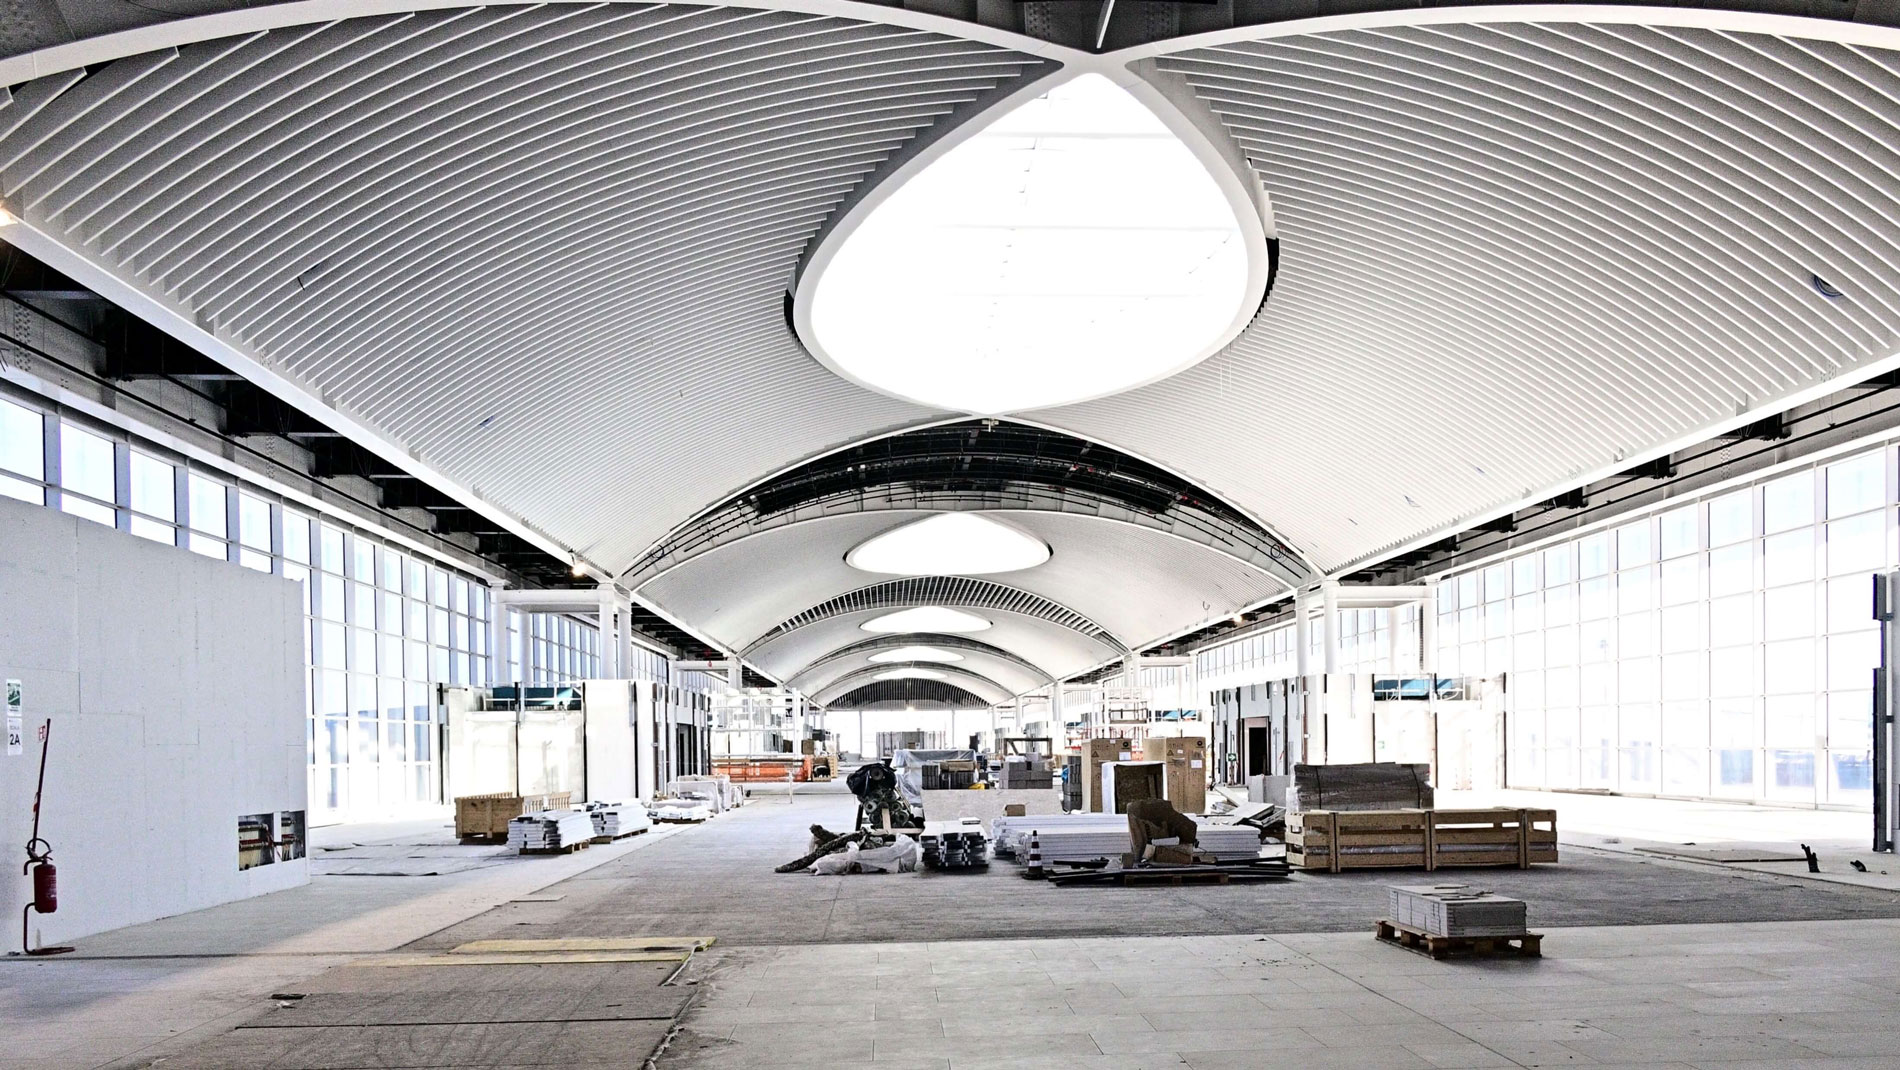 Pier A and Terminal 1 Airside Extension - Fiumicino Airport